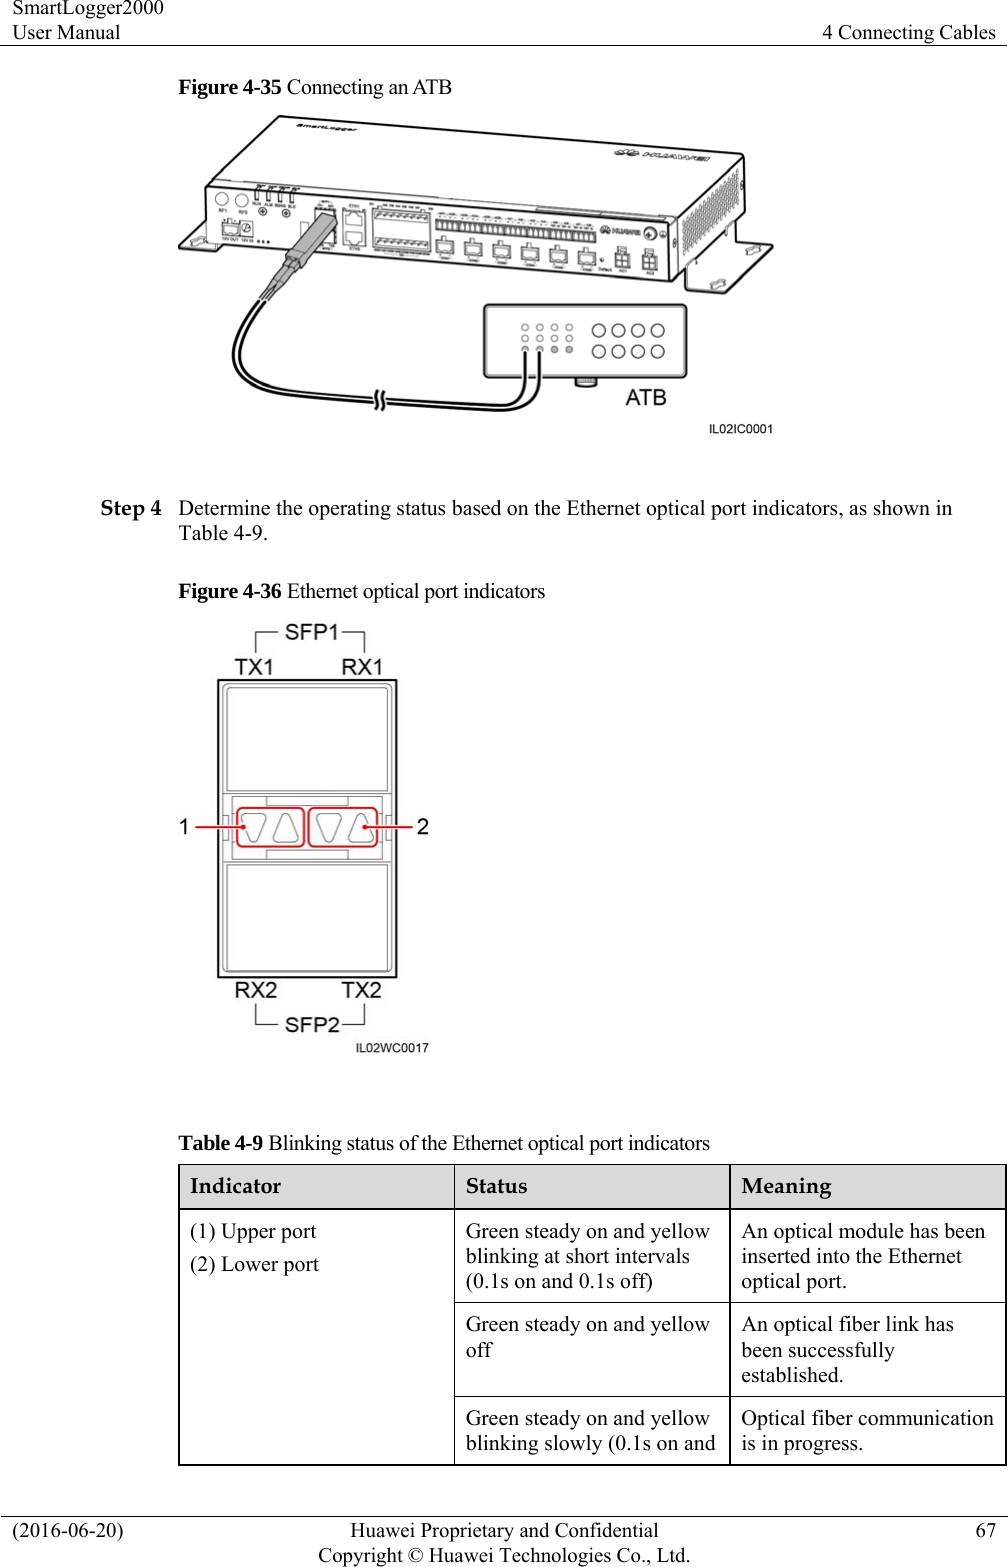 SmartLogger2000 User Manual  4 Connecting Cables (2016-06-20)  Huawei Proprietary and Confidential         Copyright © Huawei Technologies Co., Ltd.67 Figure 4-35 Connecting an ATB   Step 4 Determine the operating status based on the Ethernet optical port indicators, as shown in Table 4-9.   Figure 4-36 Ethernet optical port indicators   Table 4-9 Blinking status of the Ethernet optical port indicators Indicator  Status  Meaning (1) Upper port (2) Lower port Green steady on and yellow blinking at short intervals (0.1s on and 0.1s off) An optical module has been inserted into the Ethernet optical port.   Green steady on and yellow off An optical fiber link has been successfully established.  Green steady on and yellow blinking slowly (0.1s on and Optical fiber communication is in progress.   